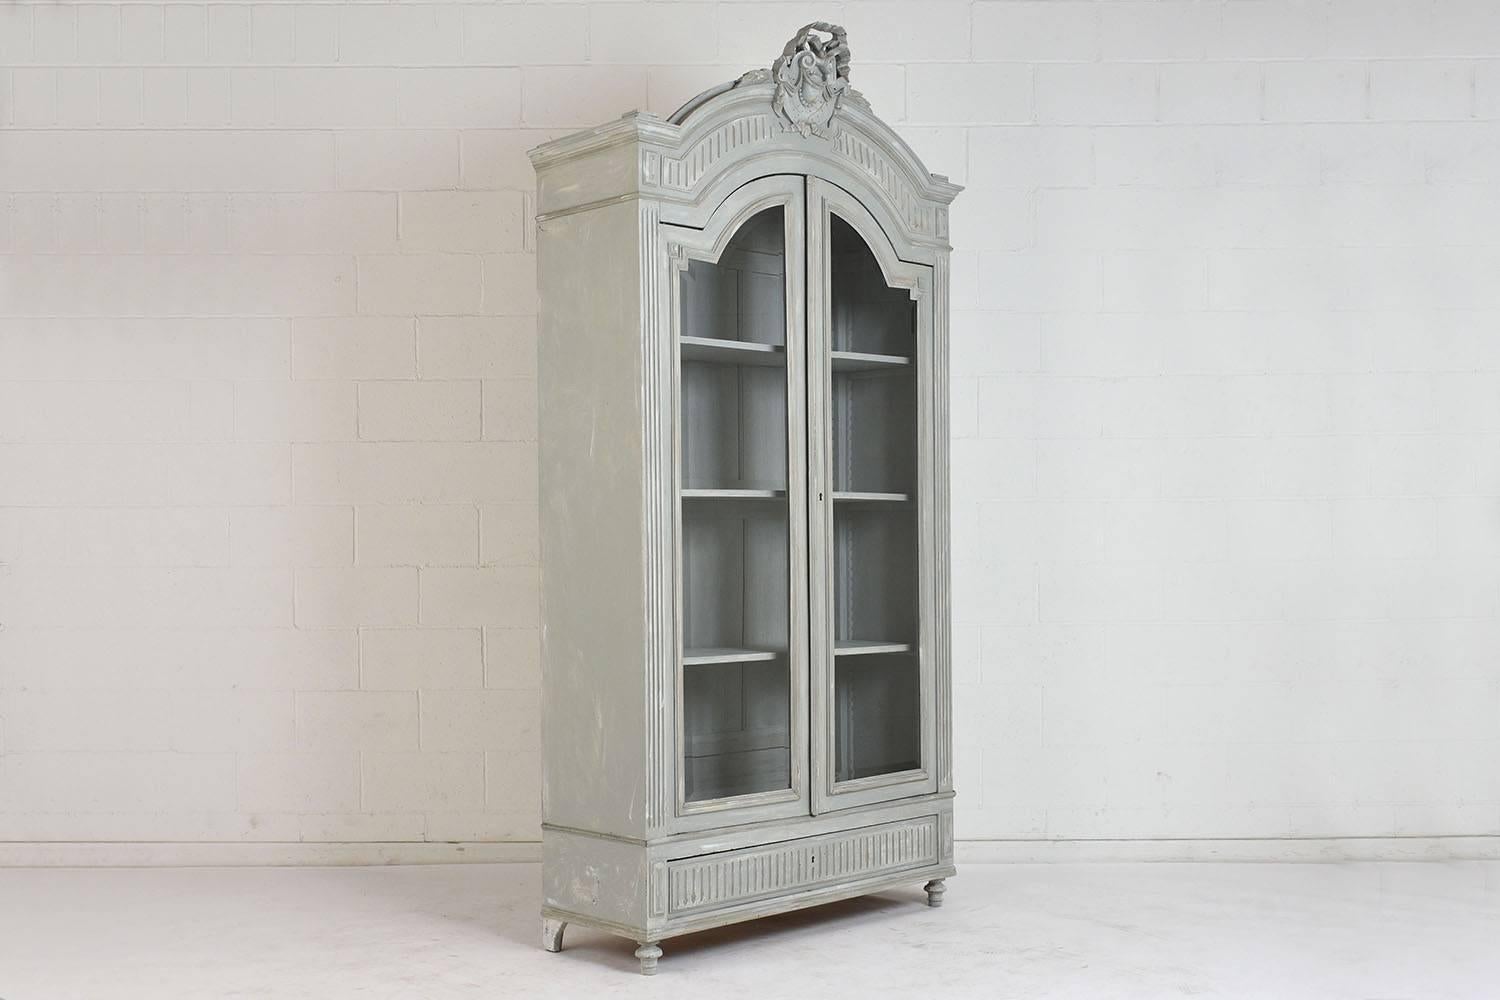 This 1900s French Louis XVI-style bookcase is made of walnut wood painted in a pale gray and off-white color combination with a distressed finish. The top of the bookcase features a carved crest of ribbons, garlands, leaves, and scrolls. The front